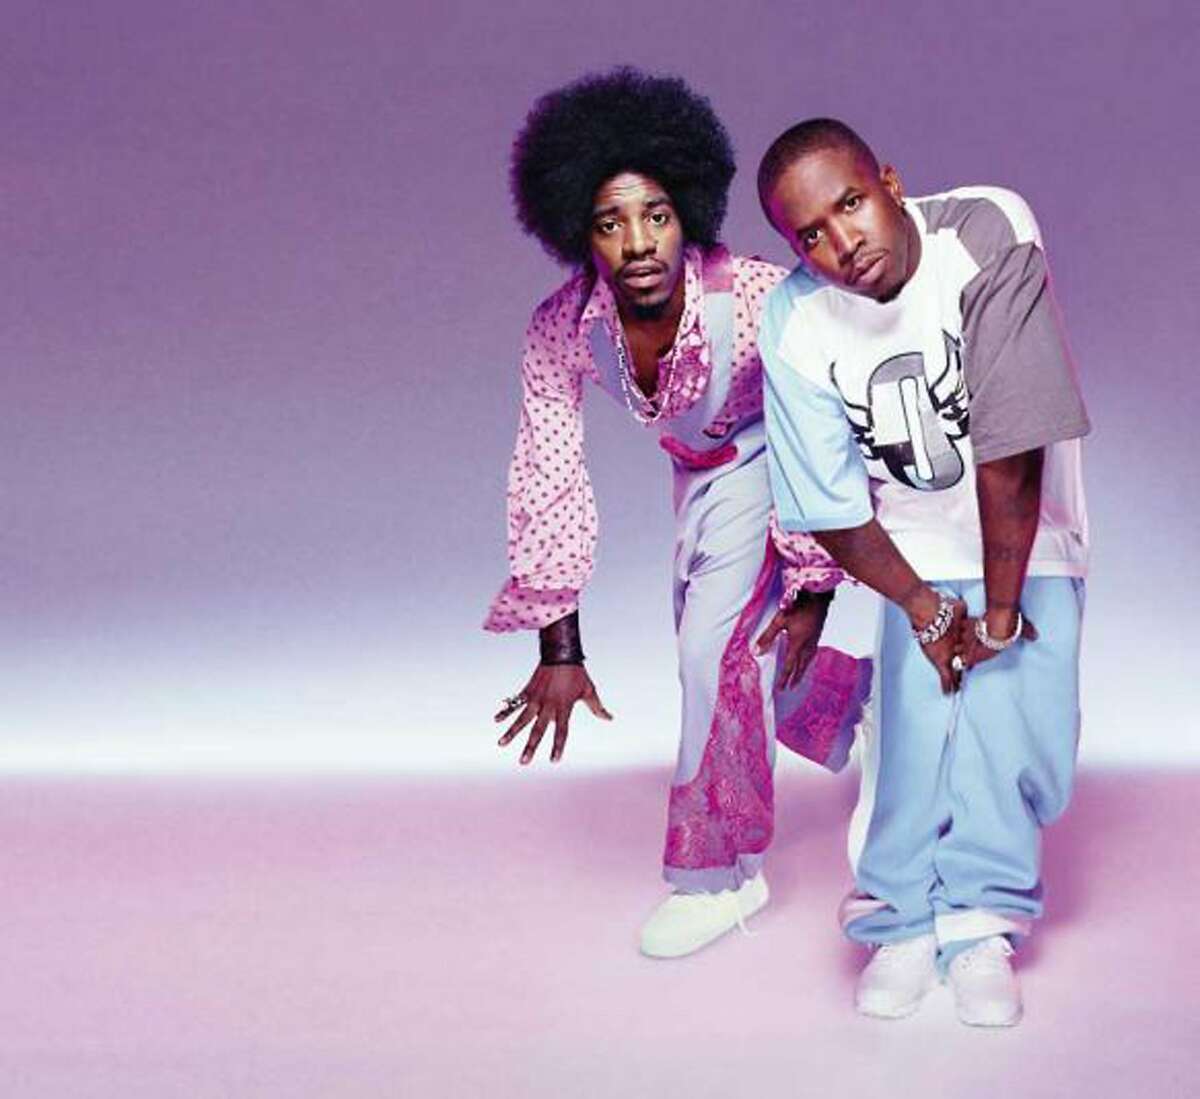 OutKast is among the acts that will perform at BottleRock, a three-day festival in Napa Valley, May 30-June 1, 2014.